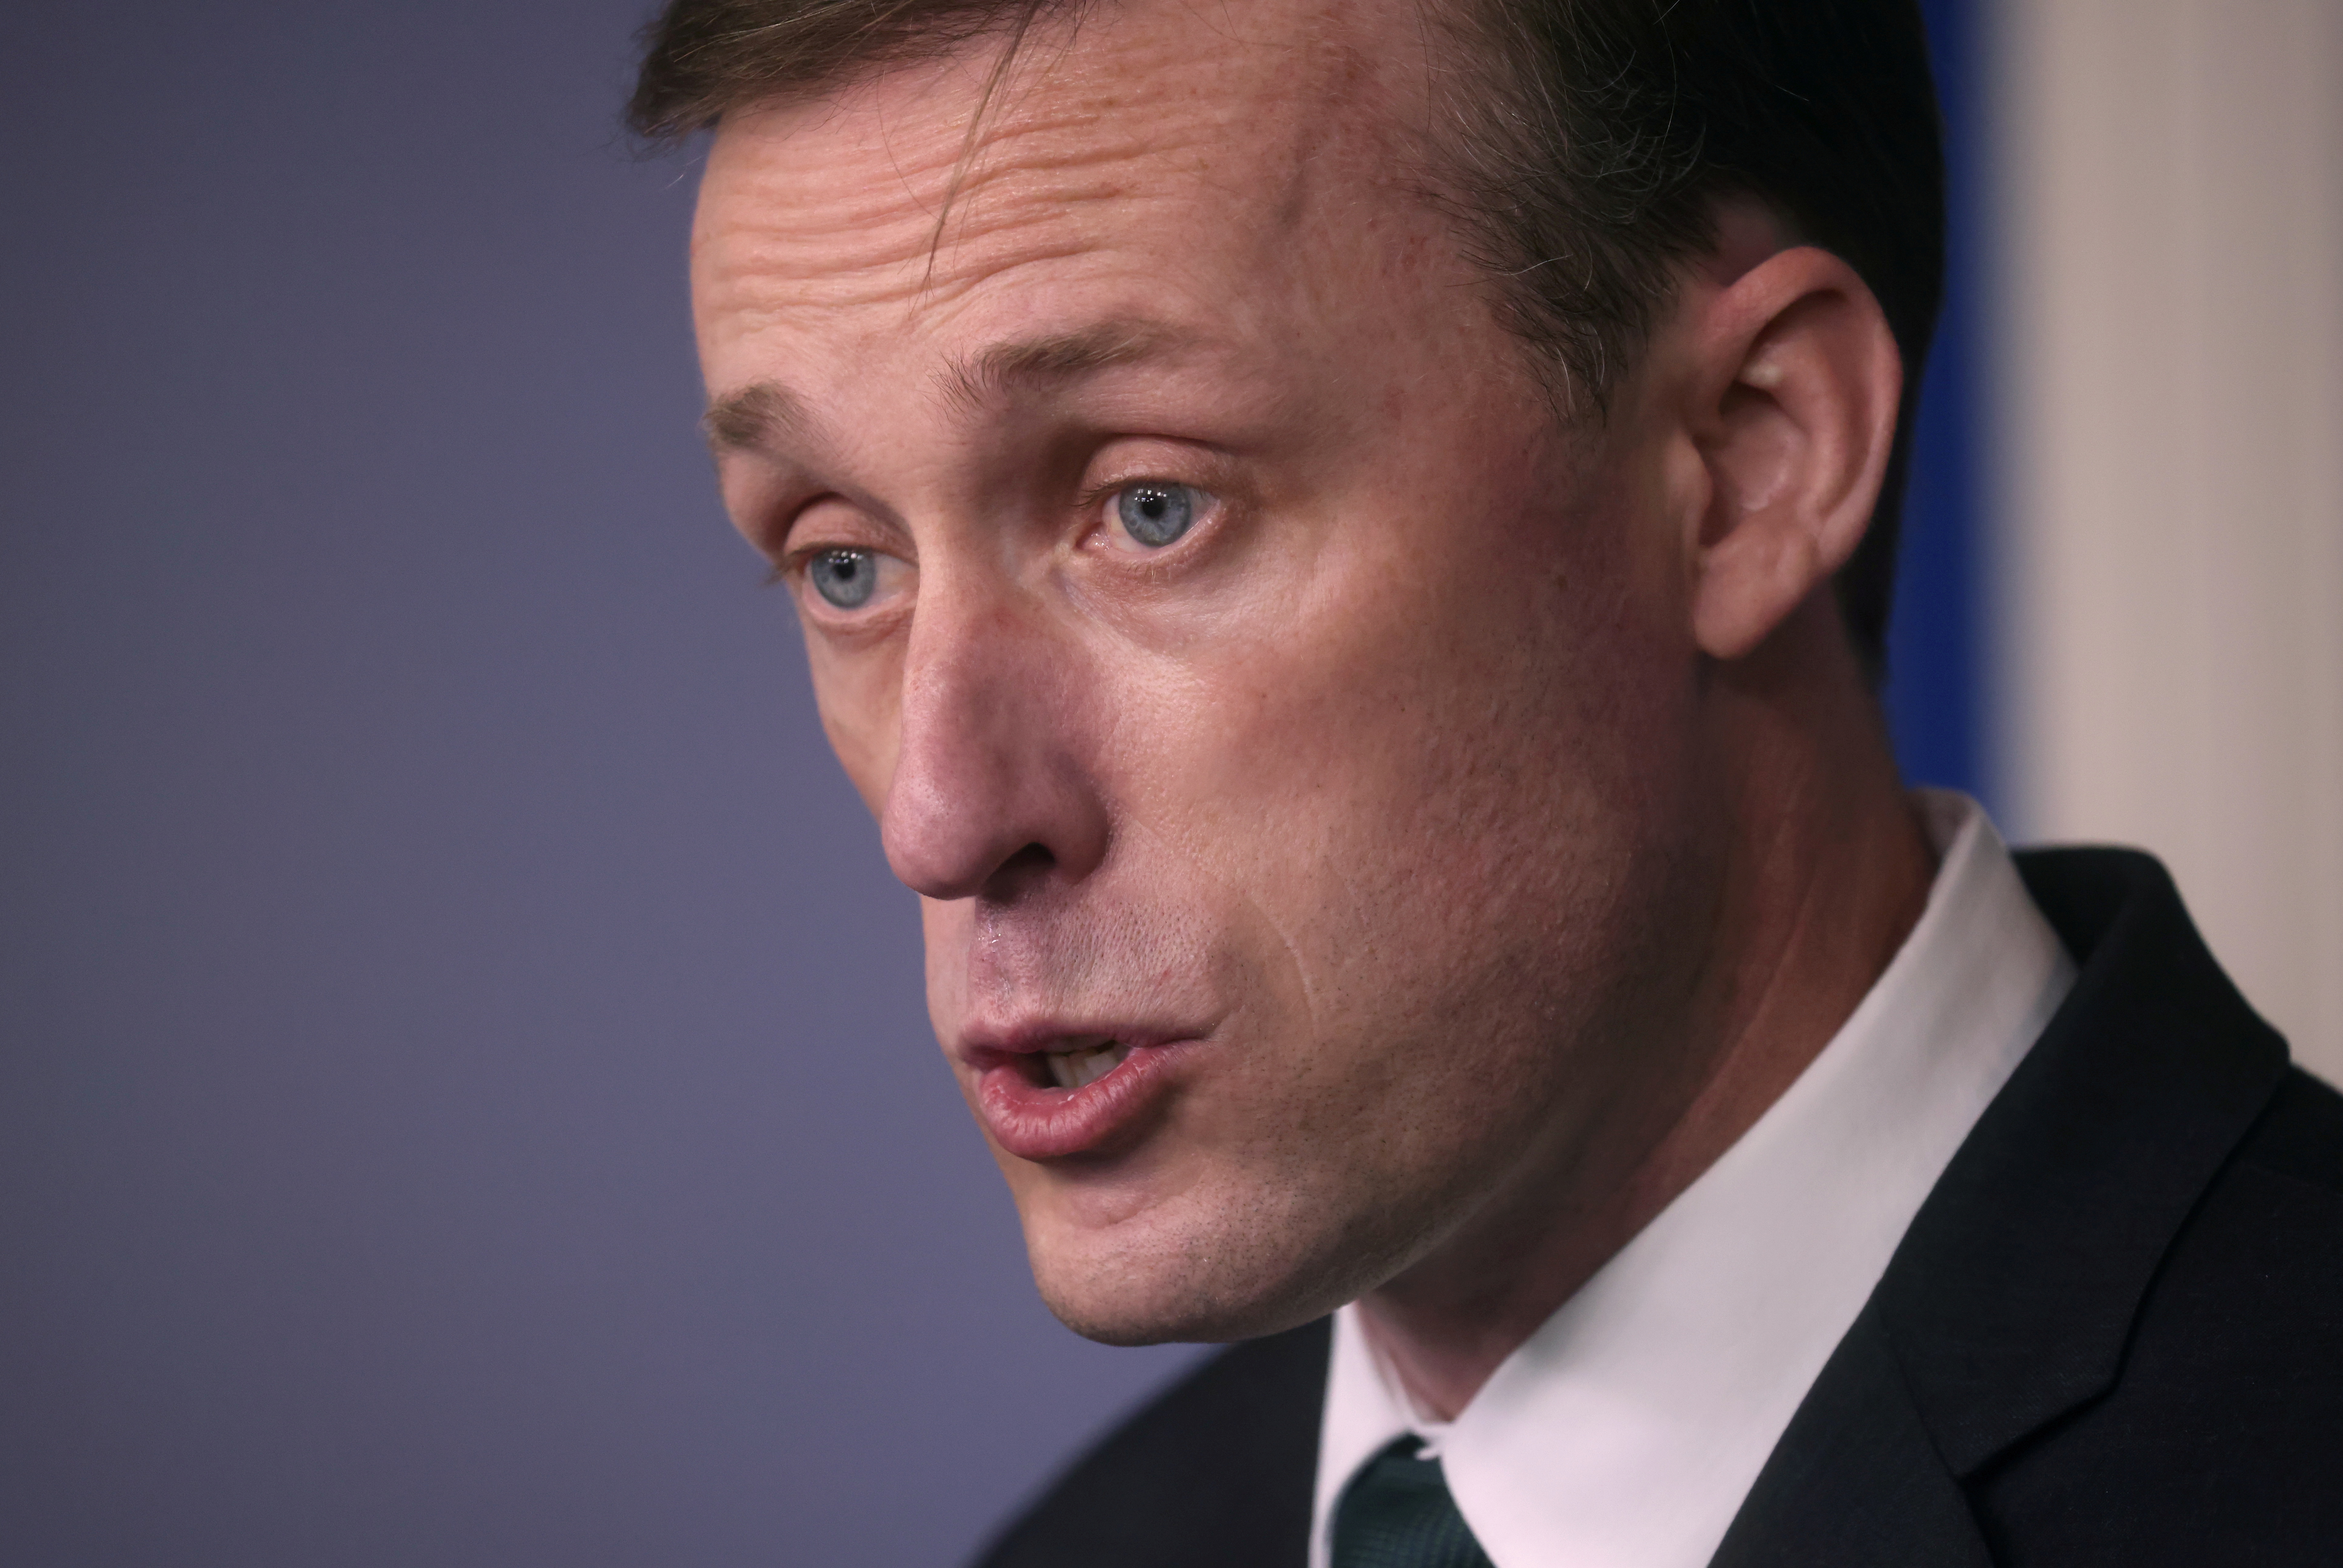 U.S. national security adviser Jake Sullivan takes part in a news briefing about the situation in Afghanistan at the White House in Washington, U.S., August 17, 2021. REUTERS/Leah Millis/File Photo